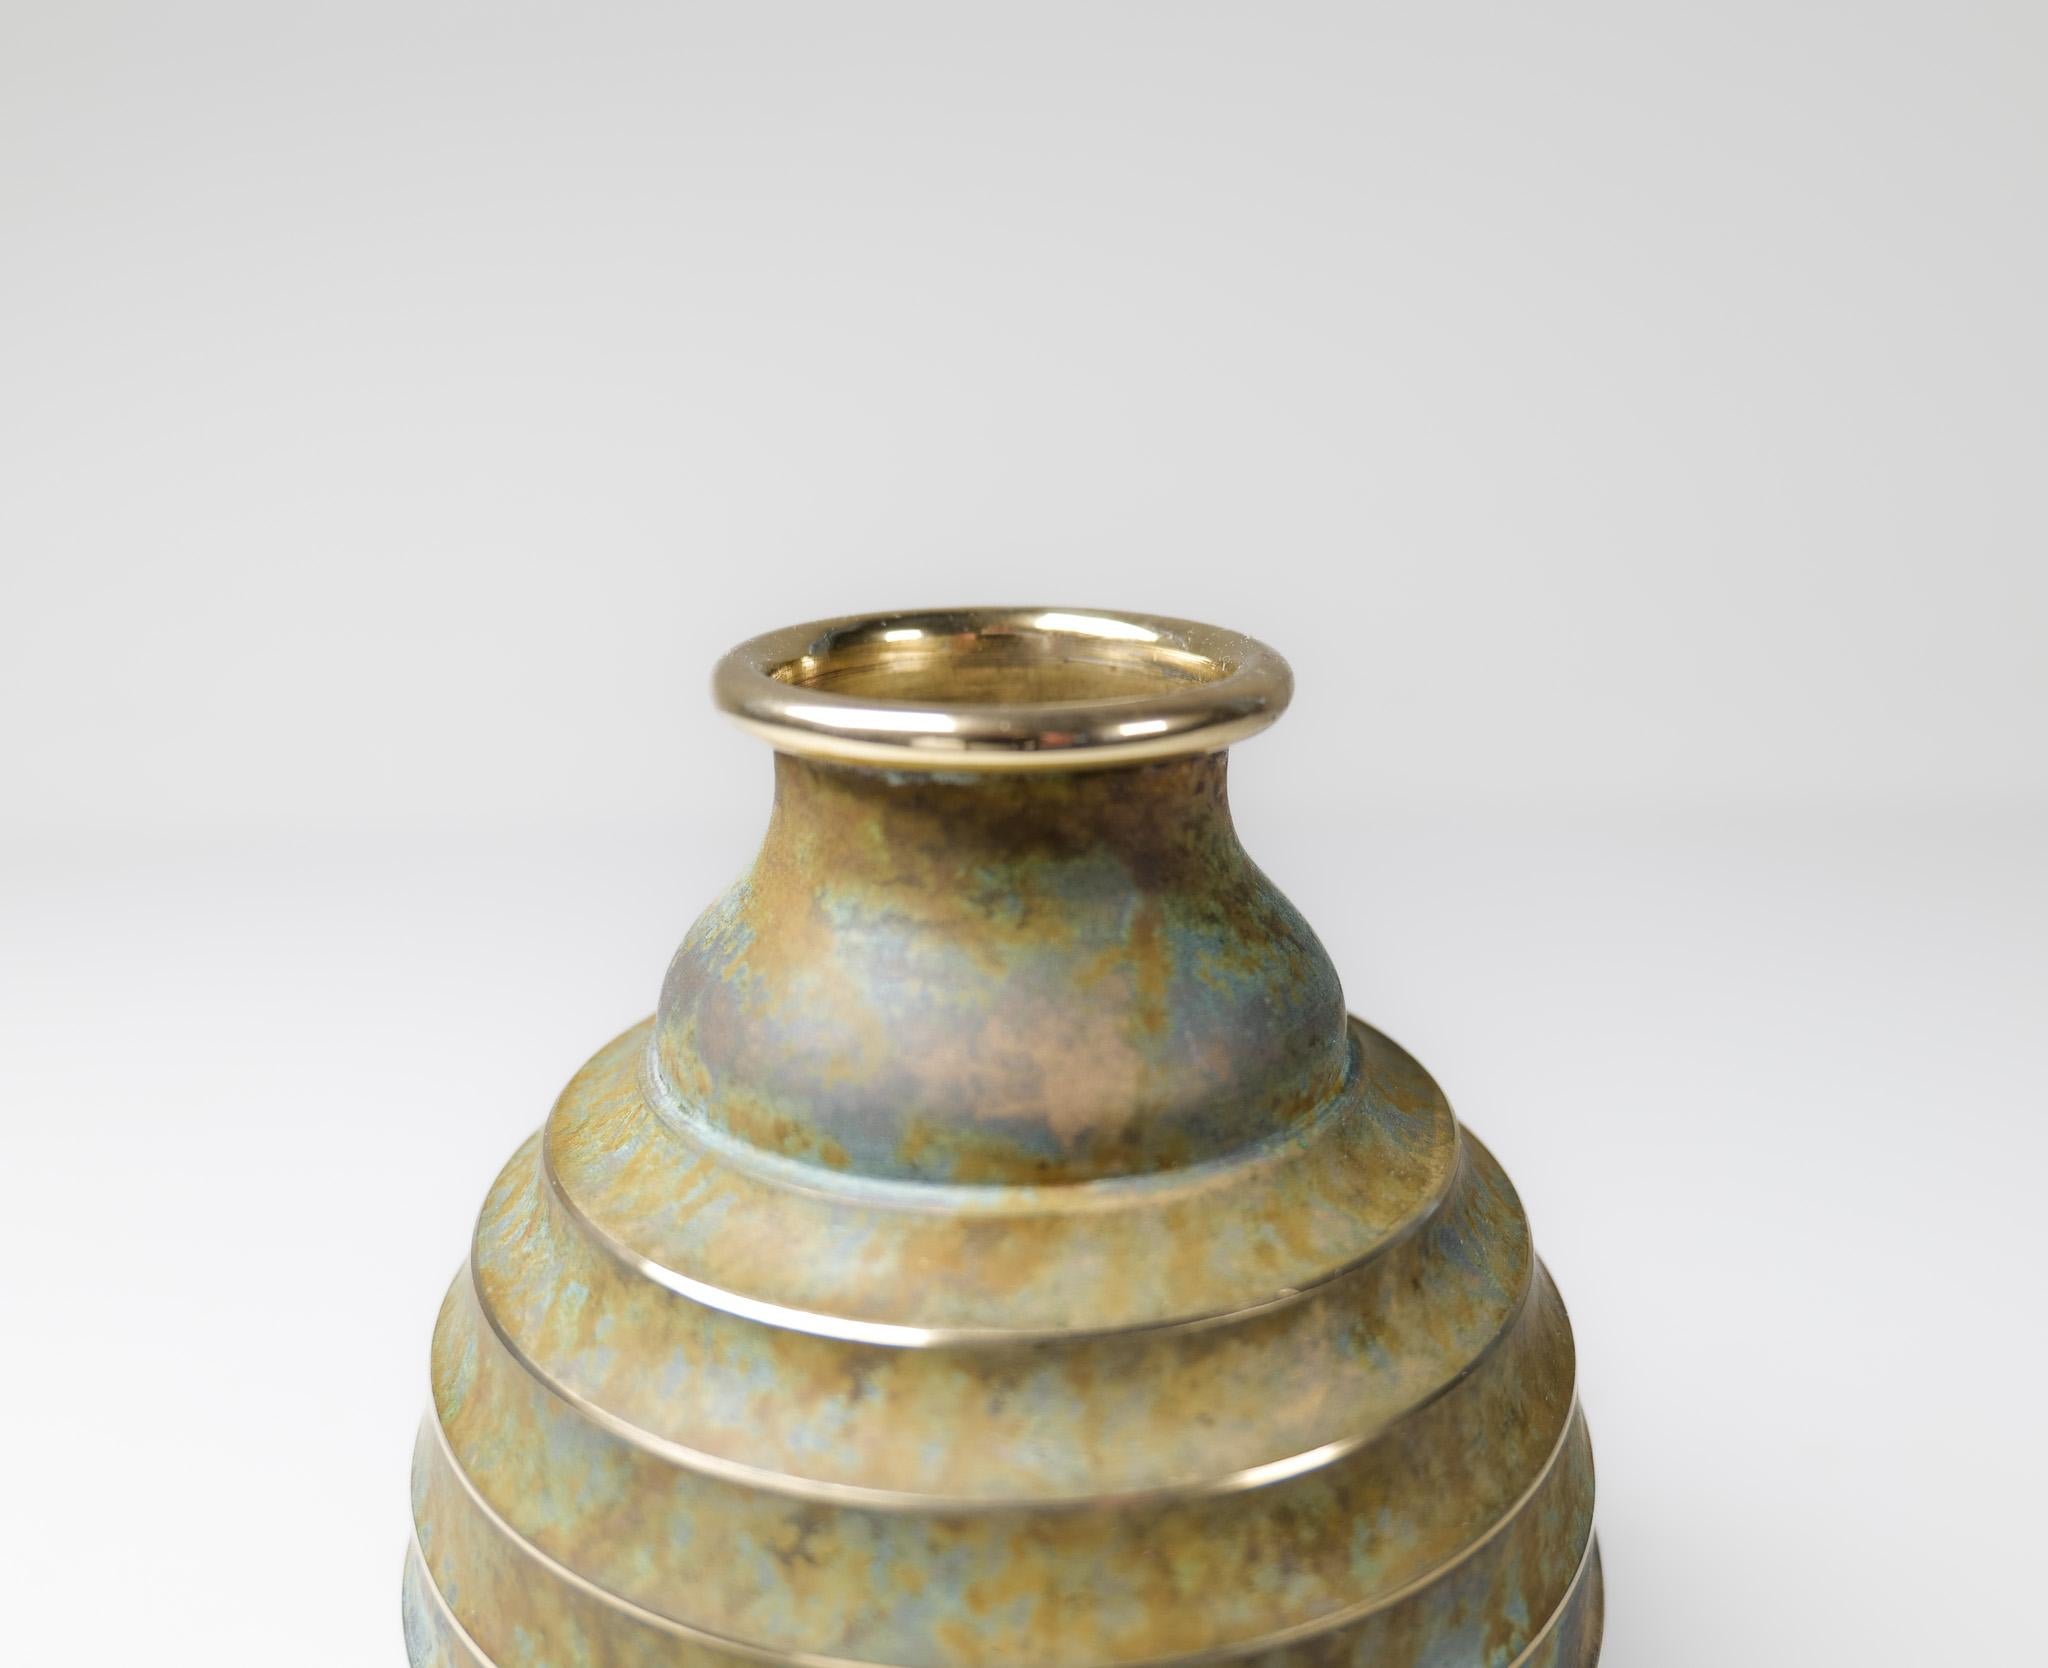 Mid-20th Century Art Deco Vase in Bronze and Brass by SVM Handarbete, Sweden 1940s For Sale